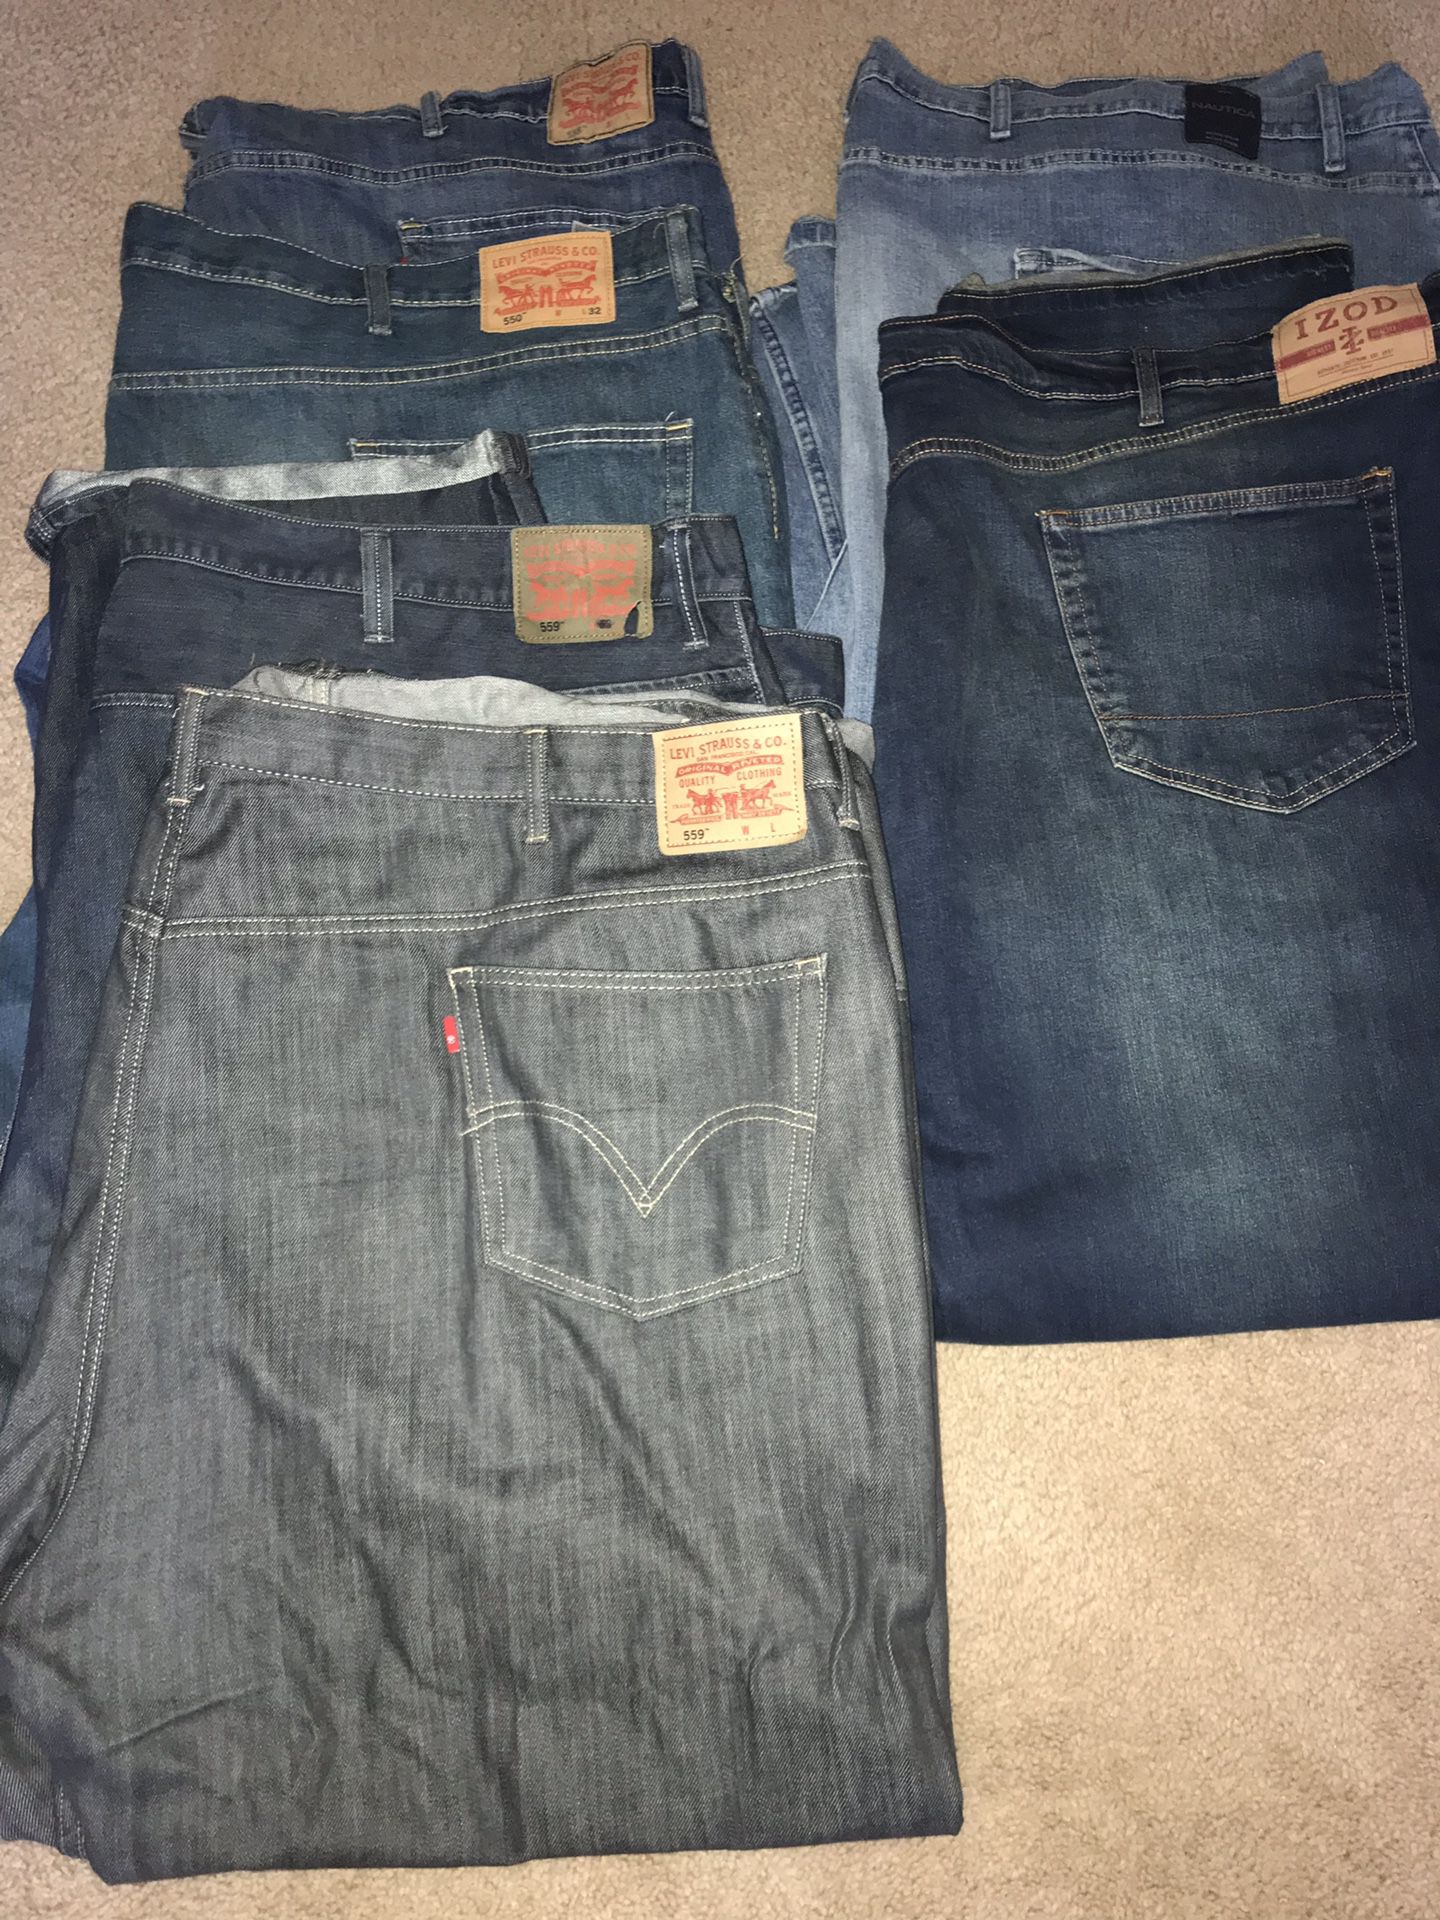 Levis, Izod and Nautica Jeans Big and Tall